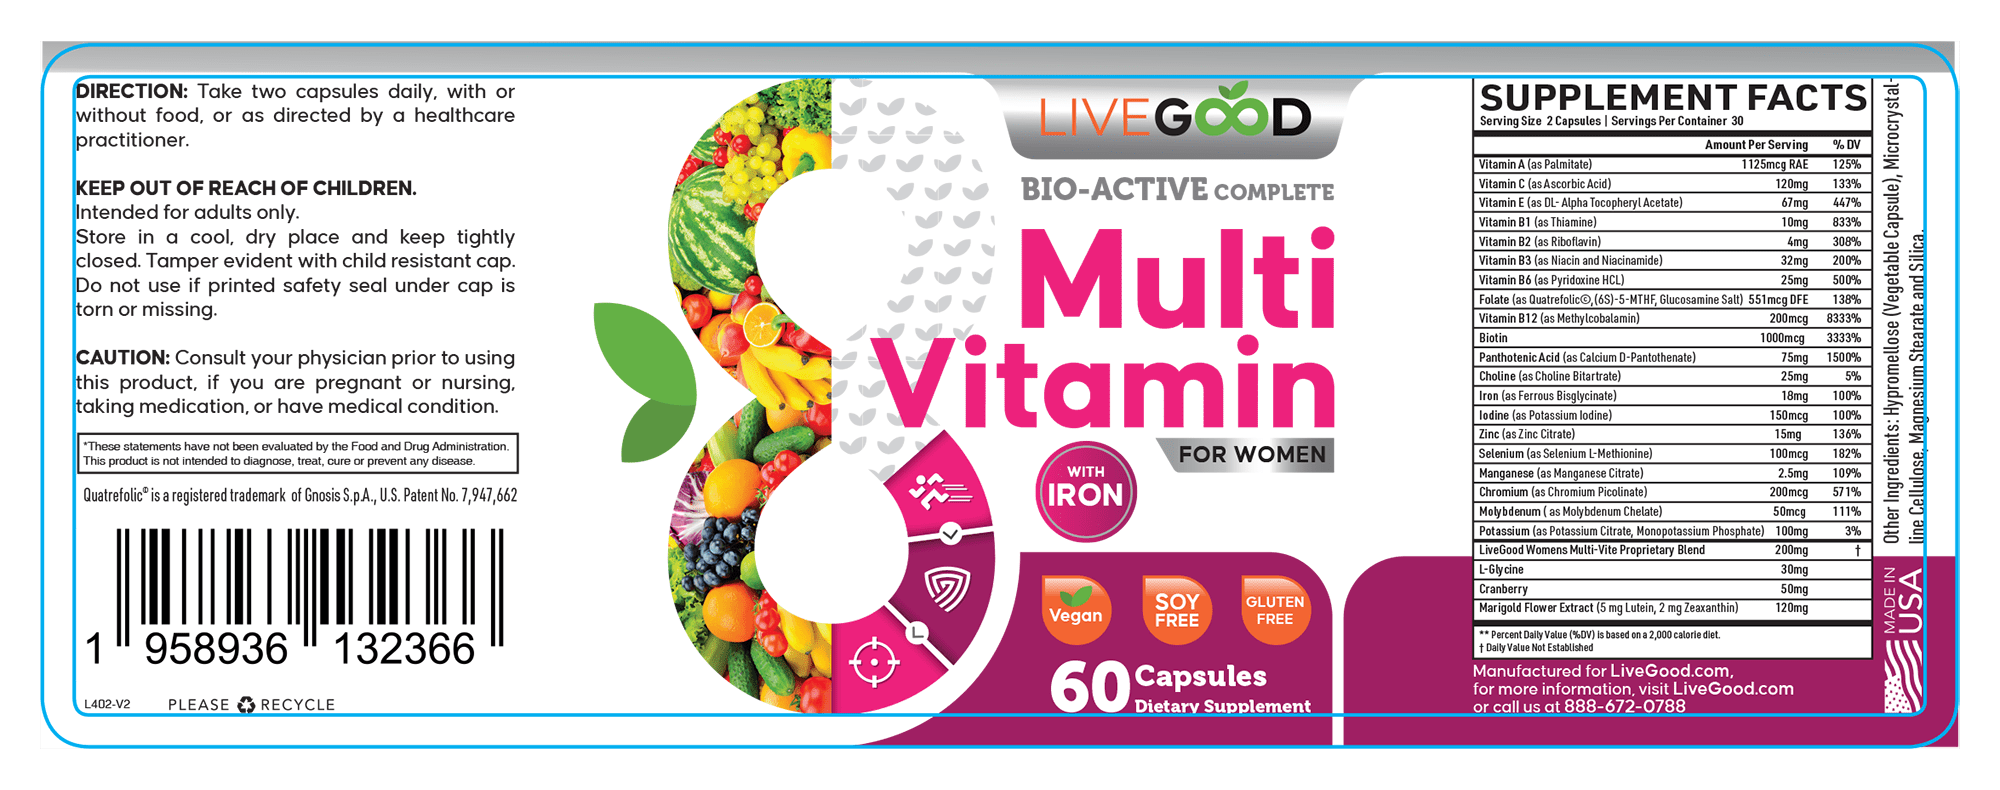 great vitamins for women